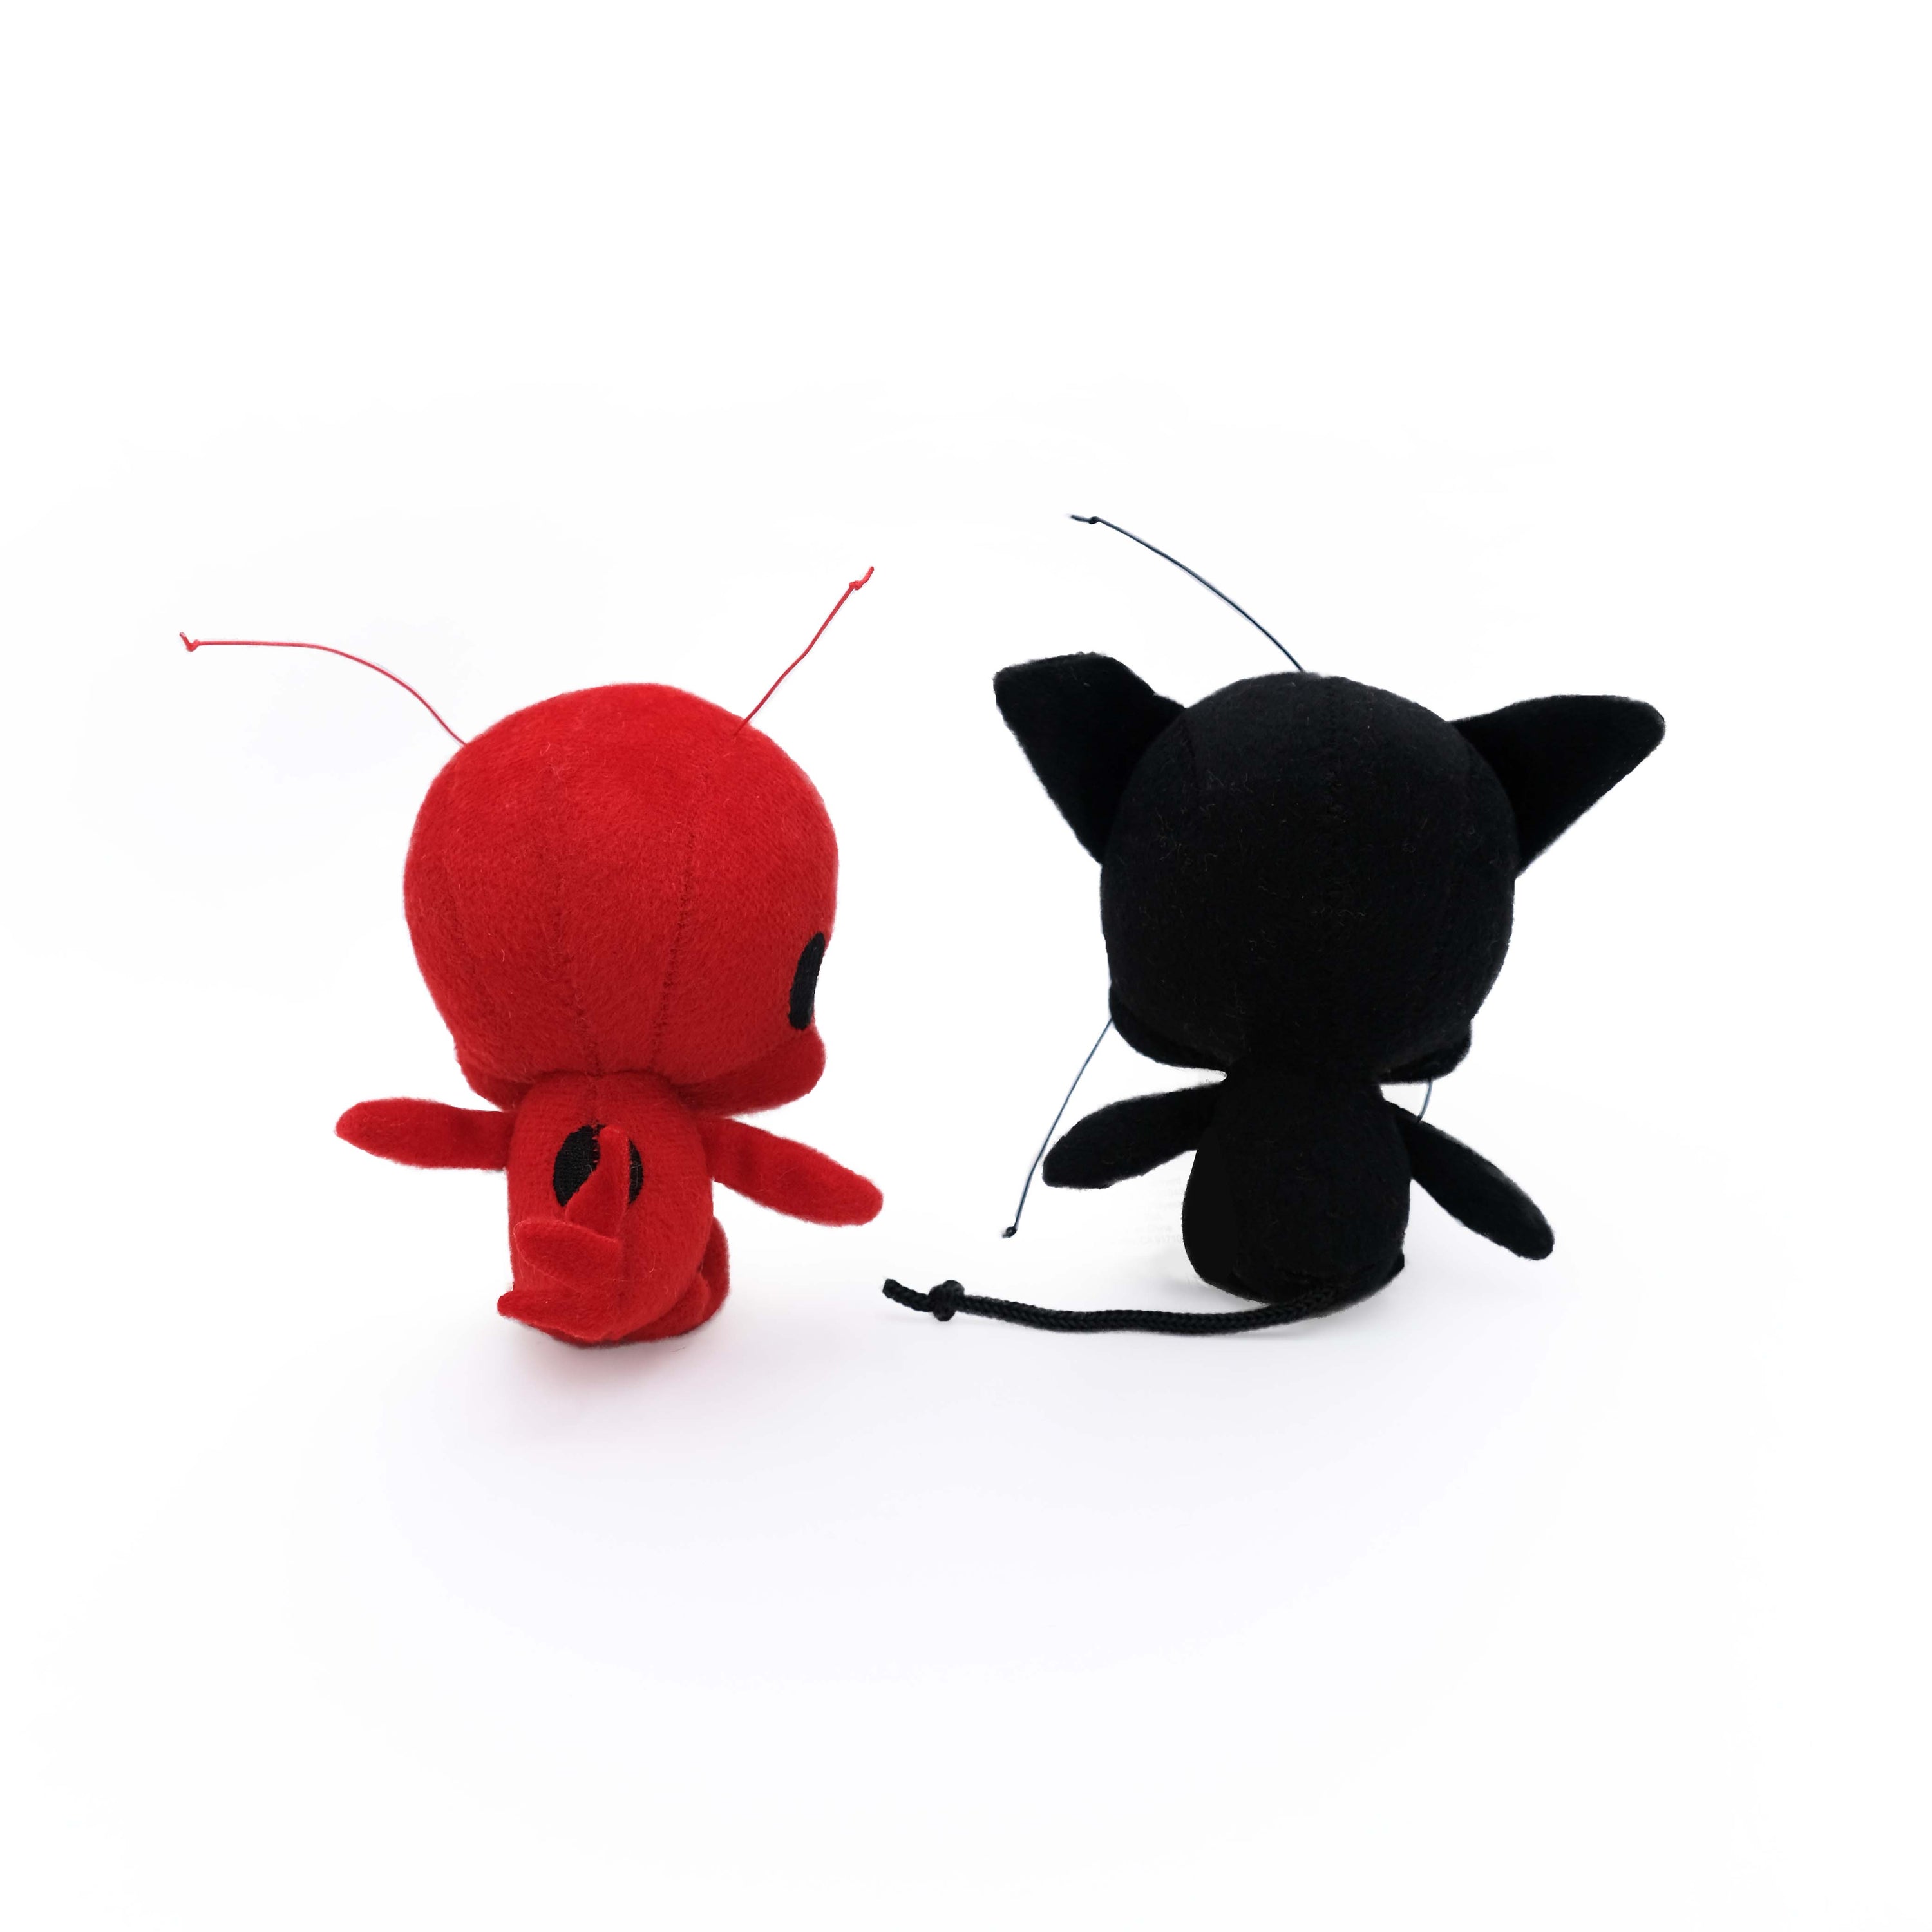 Miraculous Kwamis 2-Pack - Tikki and Plagg